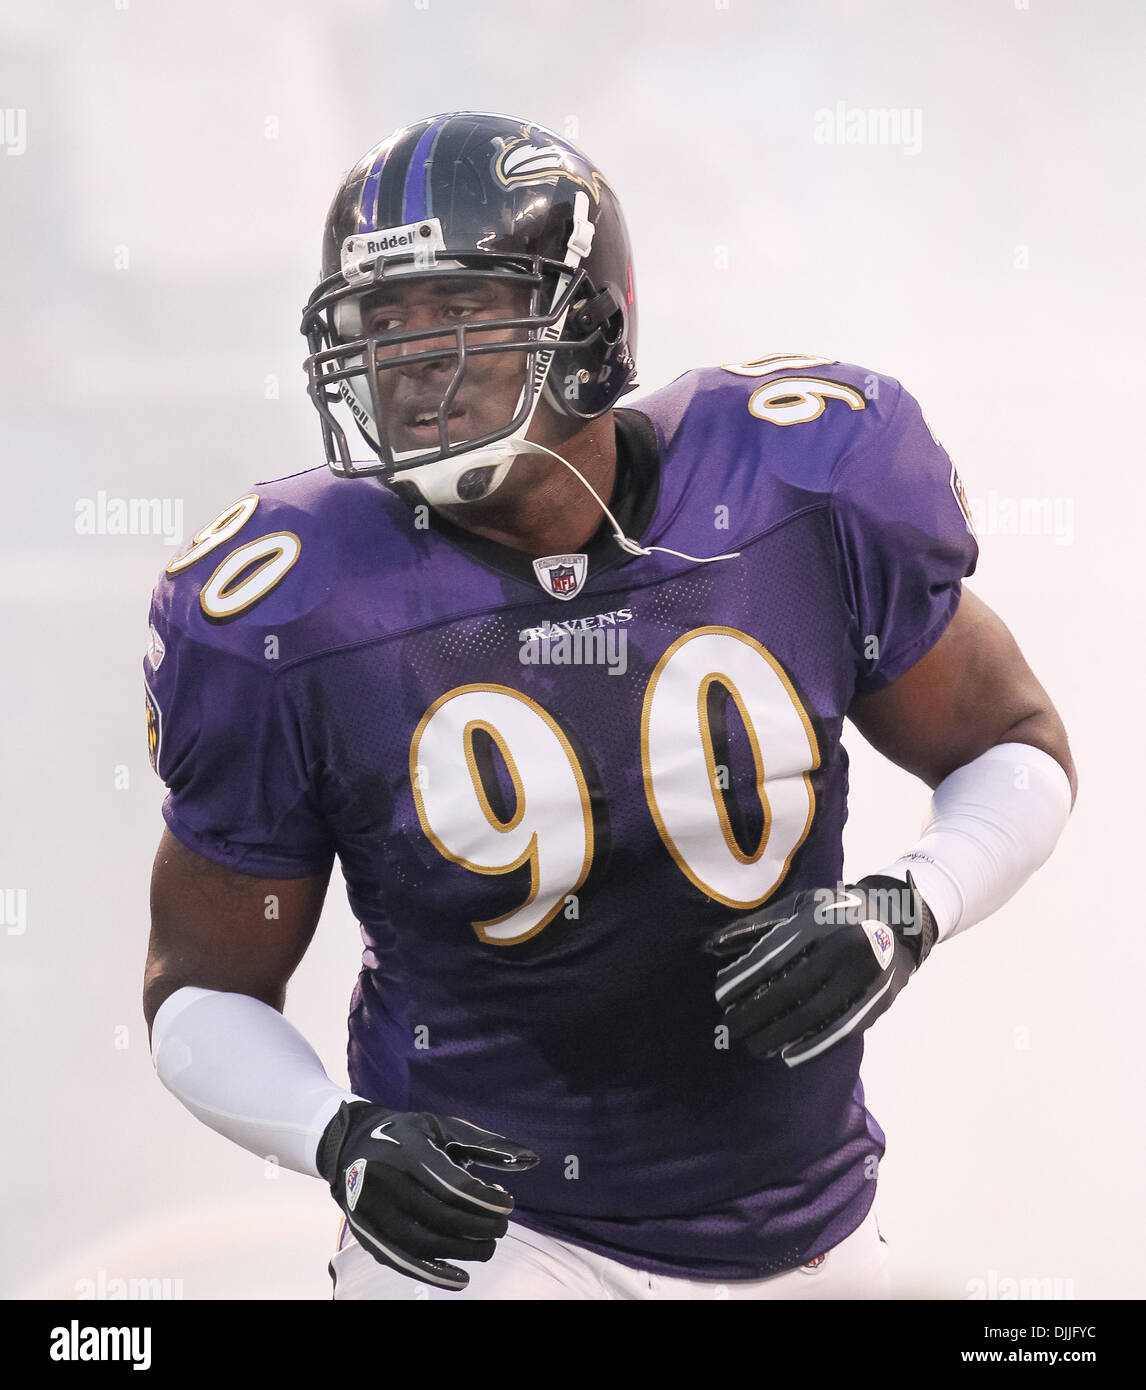 Aug. 12, 2010 - Baltimore, Maryland, United States of America - Aug 12, 2010: Baltimore Raven's defensive end Trevor Pryce (#90) enters the stadium in a cloud of smoke in the pregame introductions against the Carolina Panthers.  The Ravens defeated the Panthers 17-12 as the teams played their first preseason game at M & T Bank Stadium in Baltimore, Maryland. (Credit Image: Â© South Stock Photo